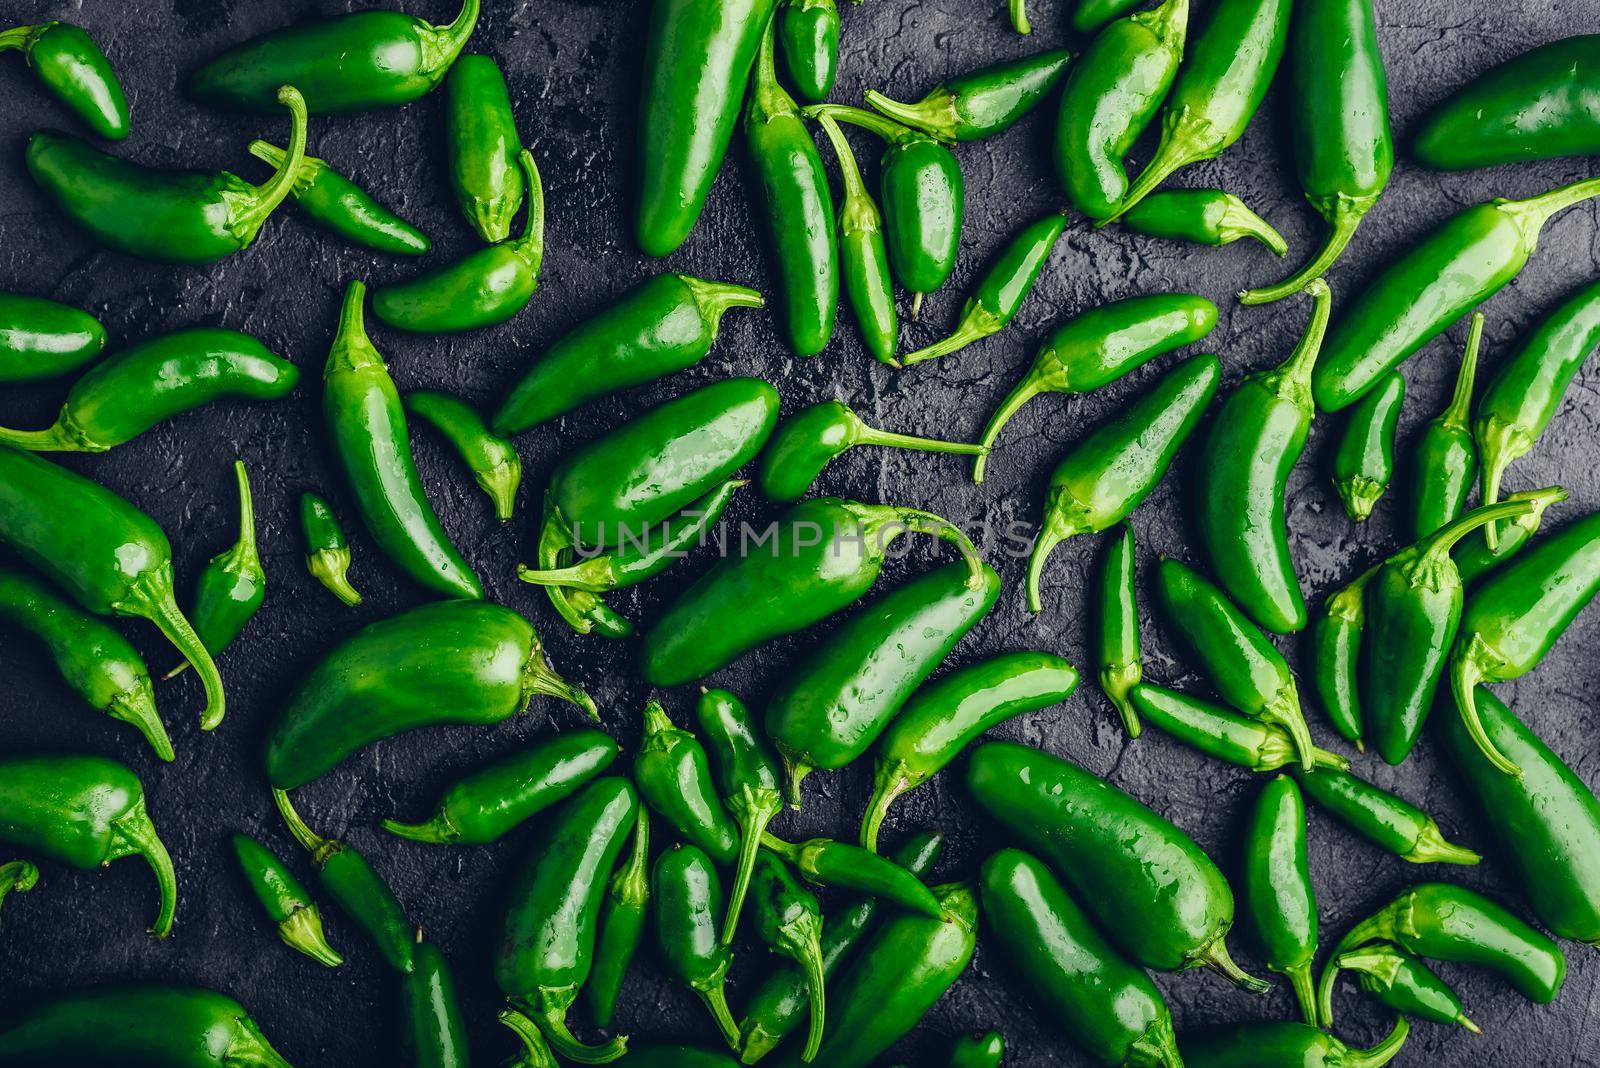 Top View of Arranged Green Jalapeno Peppers on Dark Concrete Background